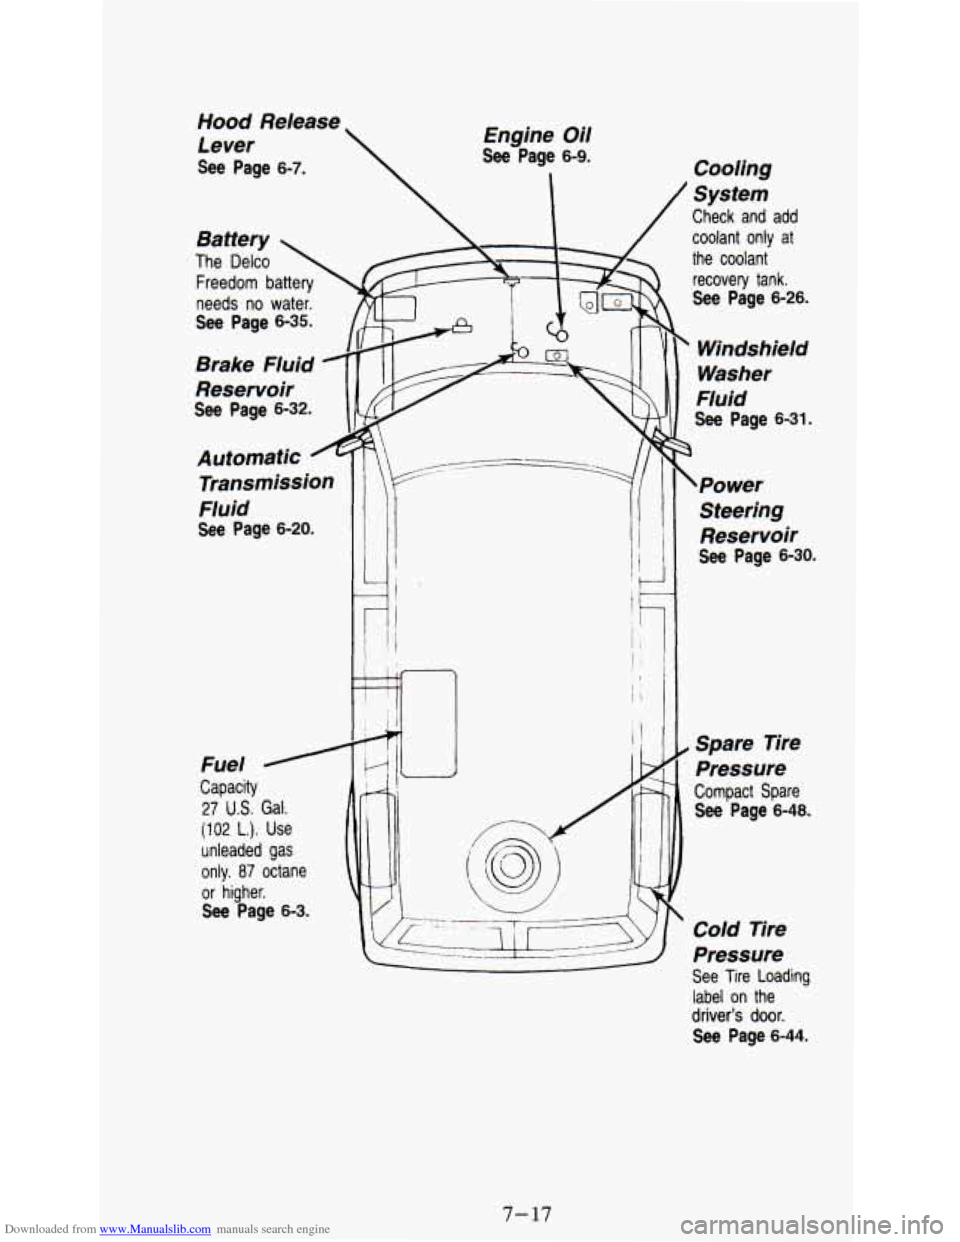 CHEVROLET ASTRO PASSENGER 1994 1.G User Guide Downloaded from www.Manualslib.com manuals search engine needs no water. I 
See Page 6-35. 
Brake  Fluid 
Reservoir 
See Page 6-32. 1 
Automatic A 
Transmission 
Fluid 
See Page 6-20. 
Fuel 
Capacity 